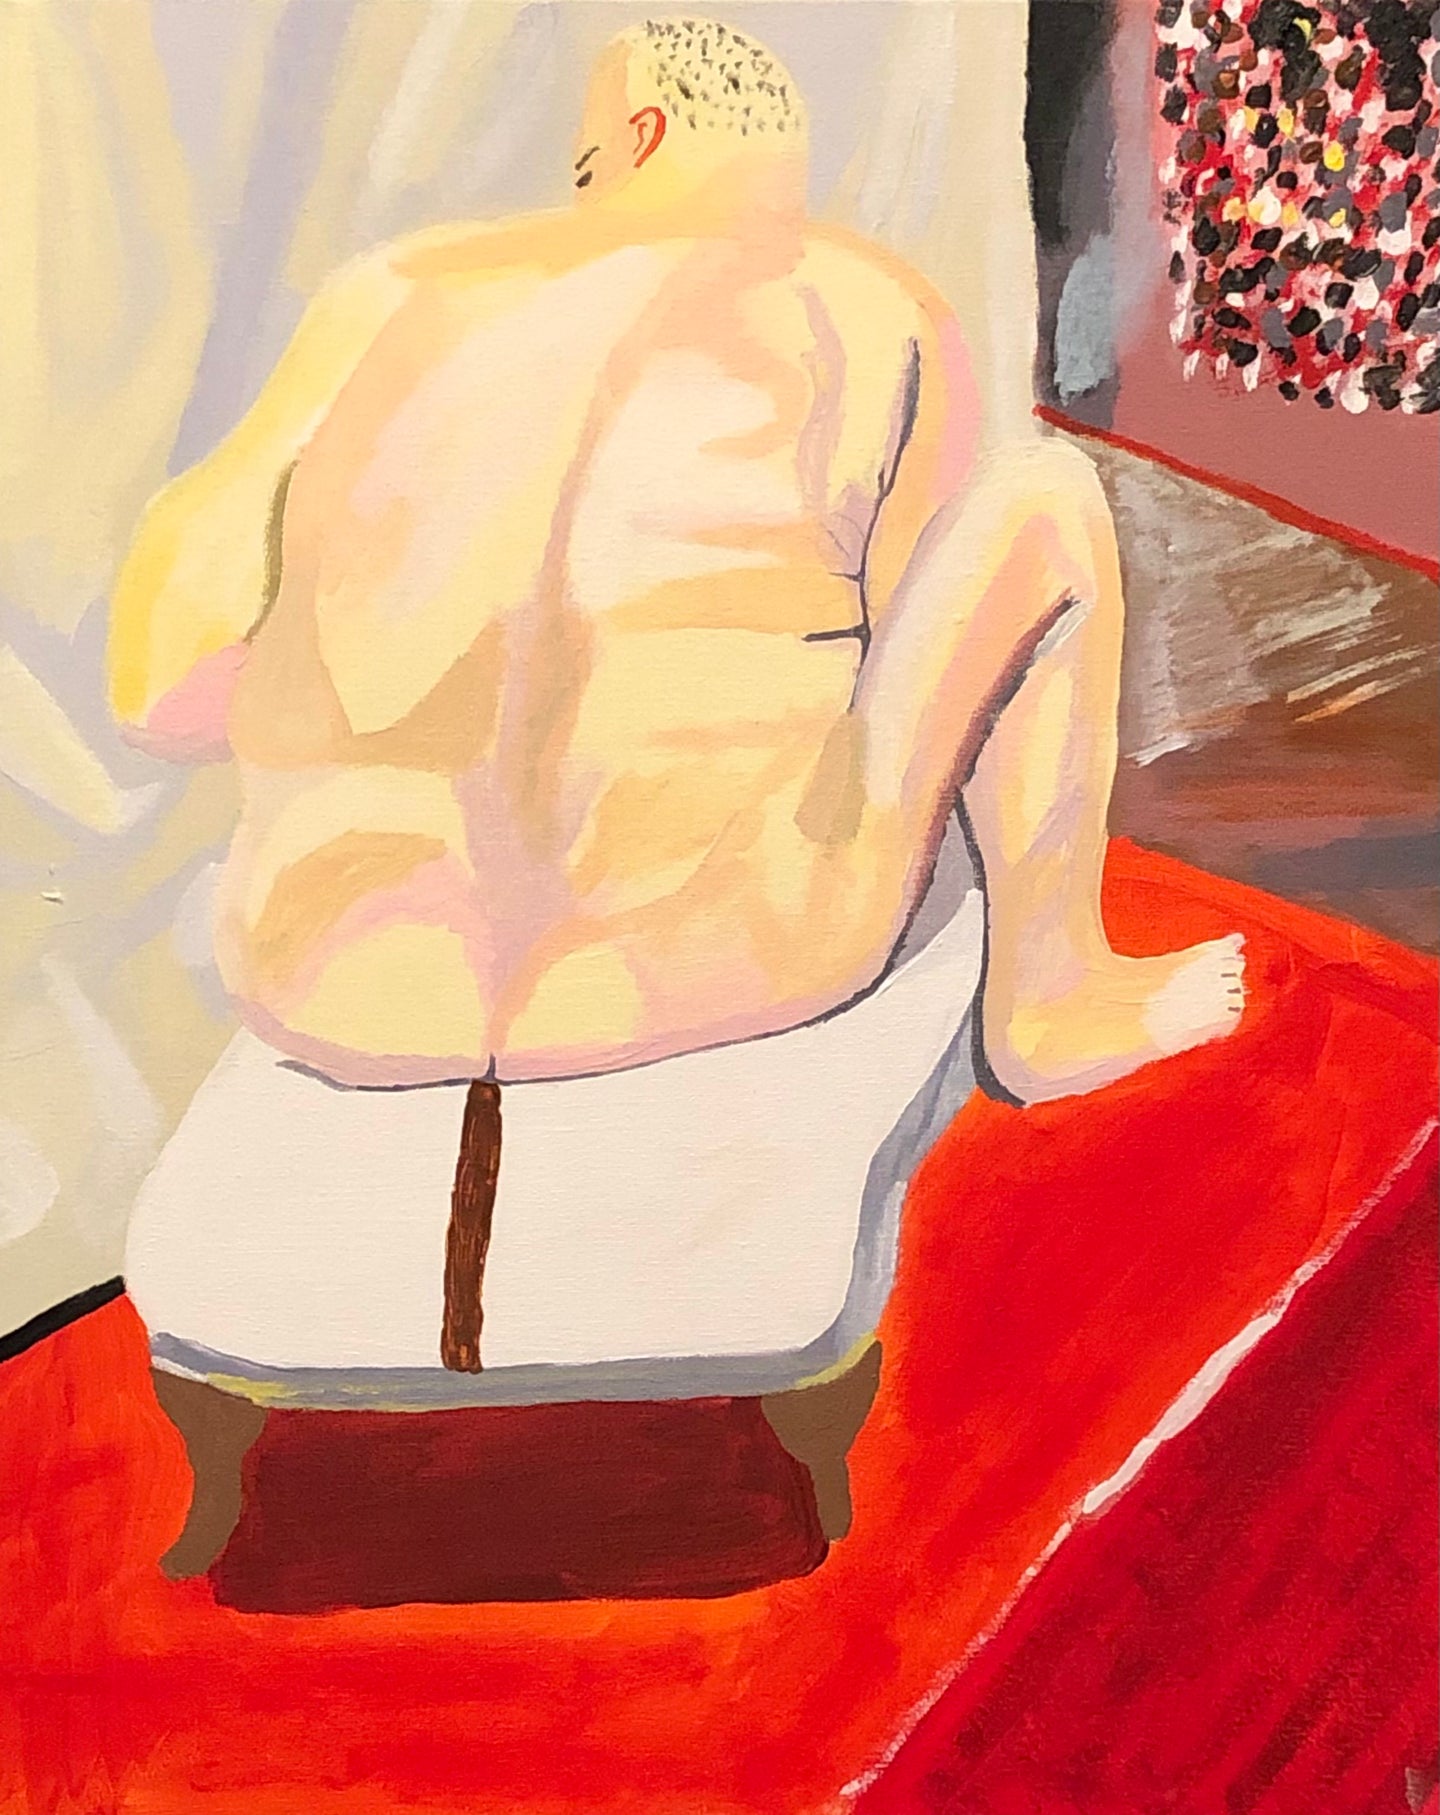 Back View of Nude Man with Shit Smear (After Lucian Freud’s 